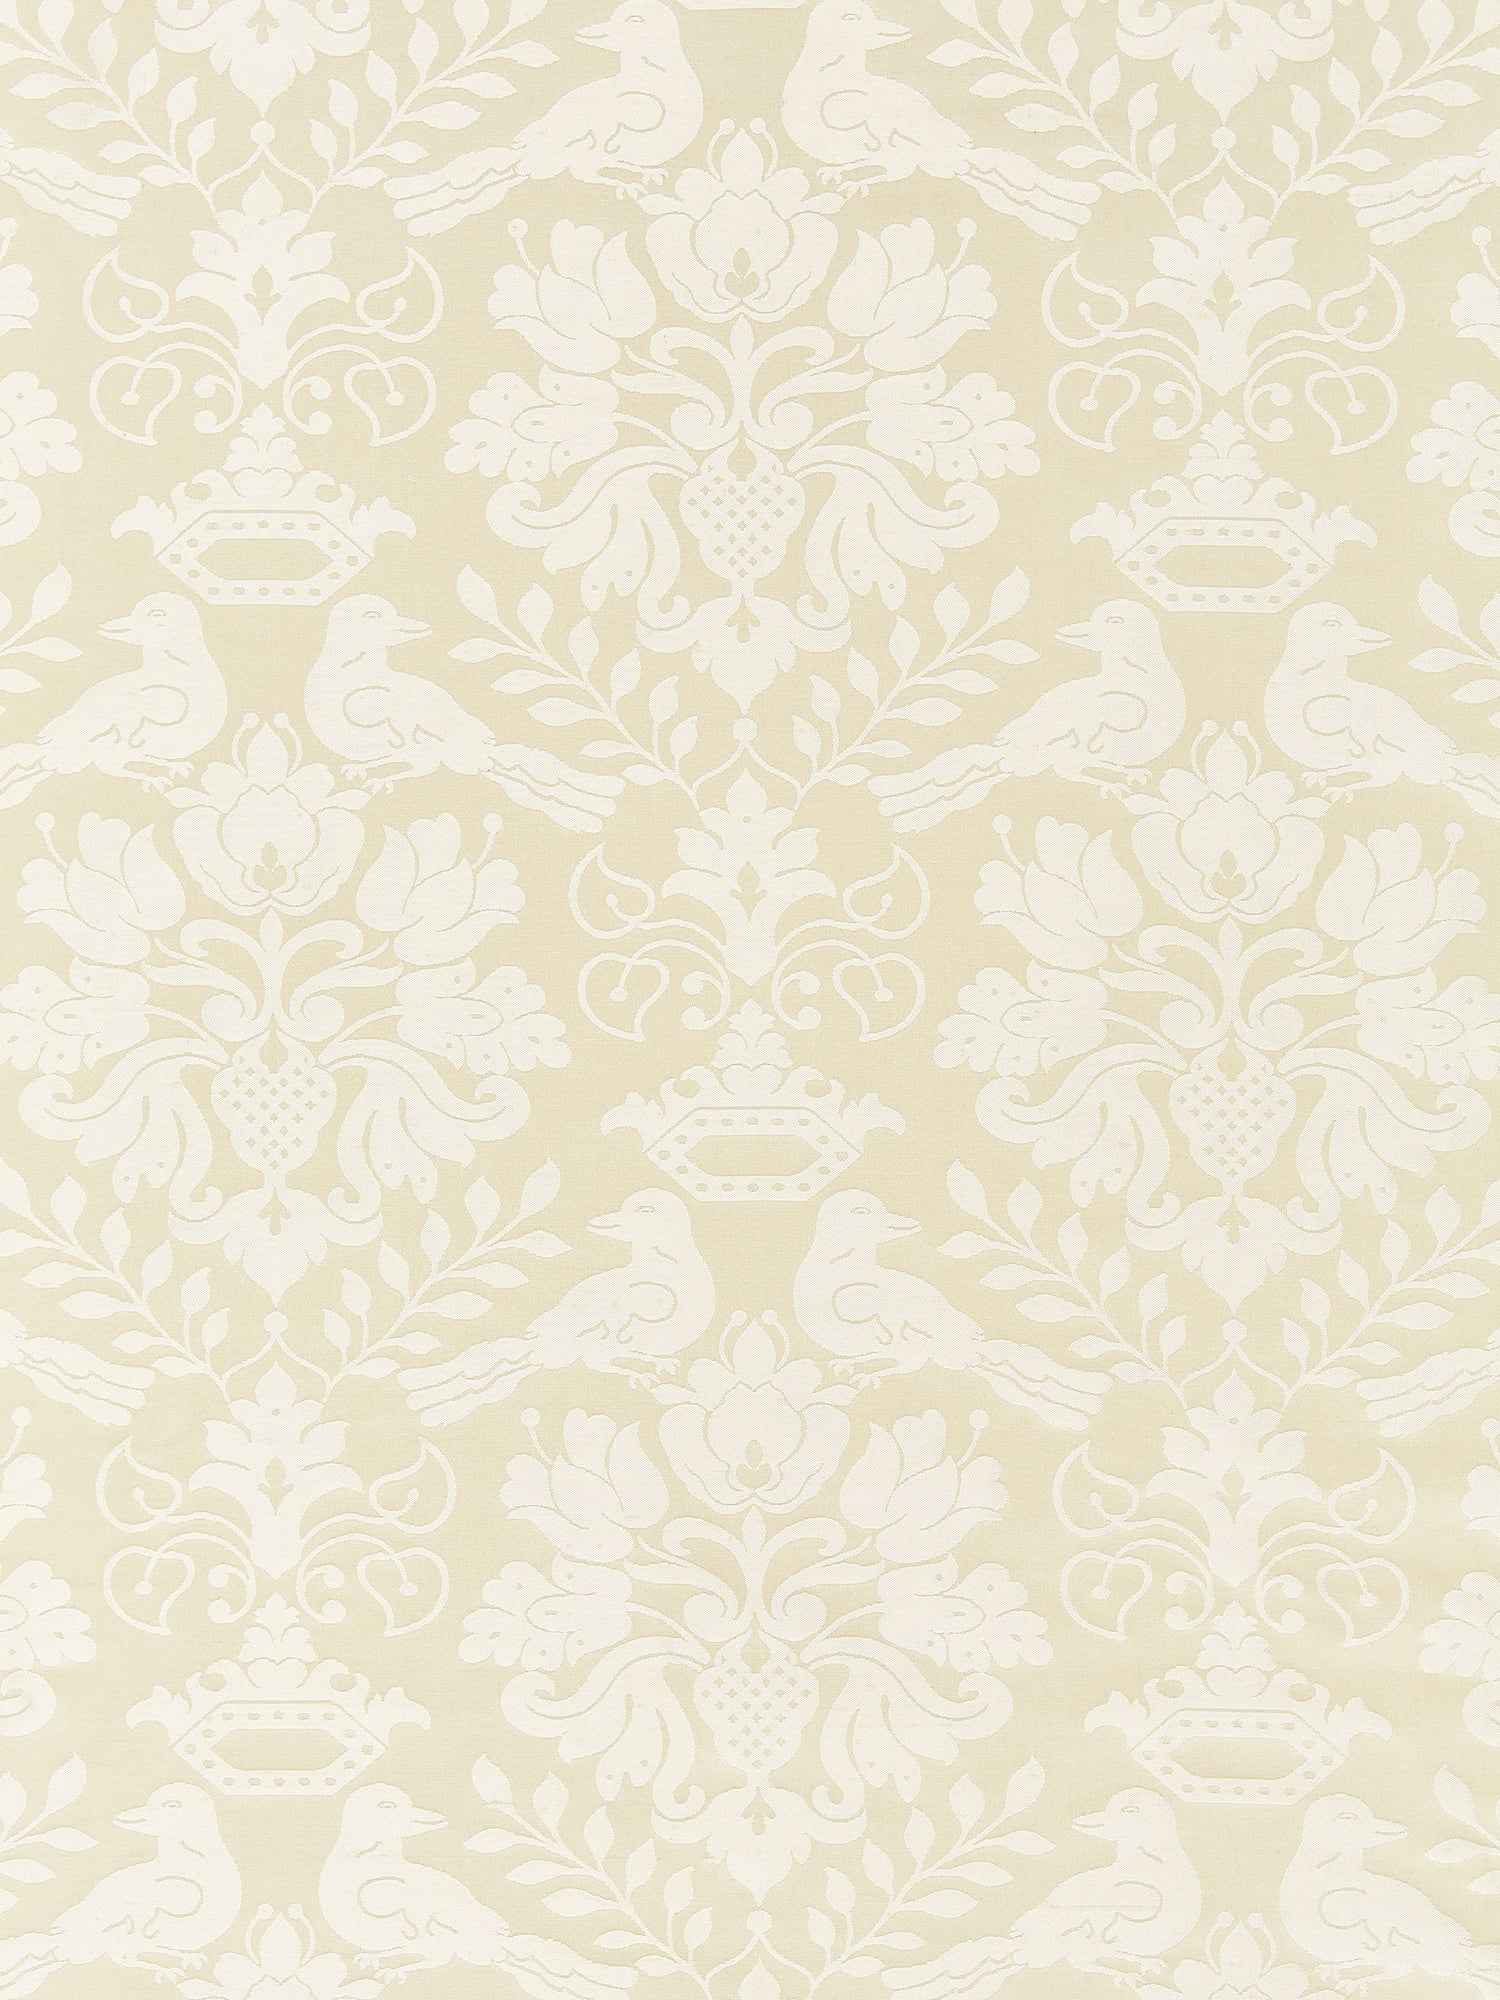 Love Bird fabric in creme color - pattern number SC 00011098MM - by Scalamandre in the Scalamandre Fabrics Book 1 collection